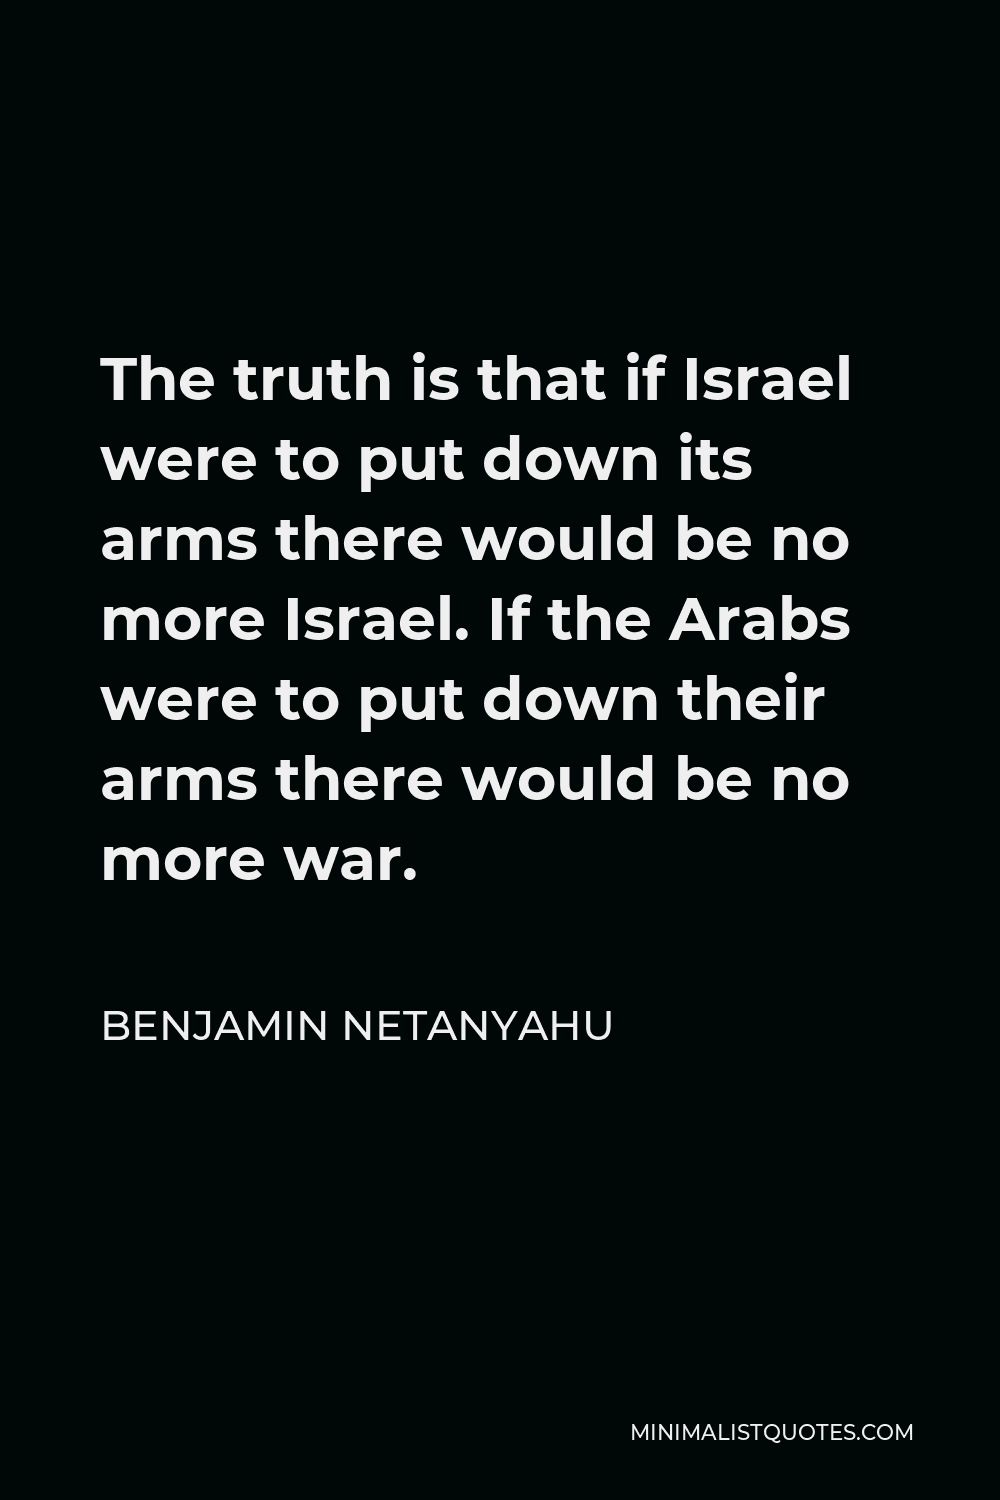 Benjamin Netanyahu Quote - The truth is that if Israel were to put down its arms there would be no more Israel. If the Arabs were to put down their arms there would be no more war.